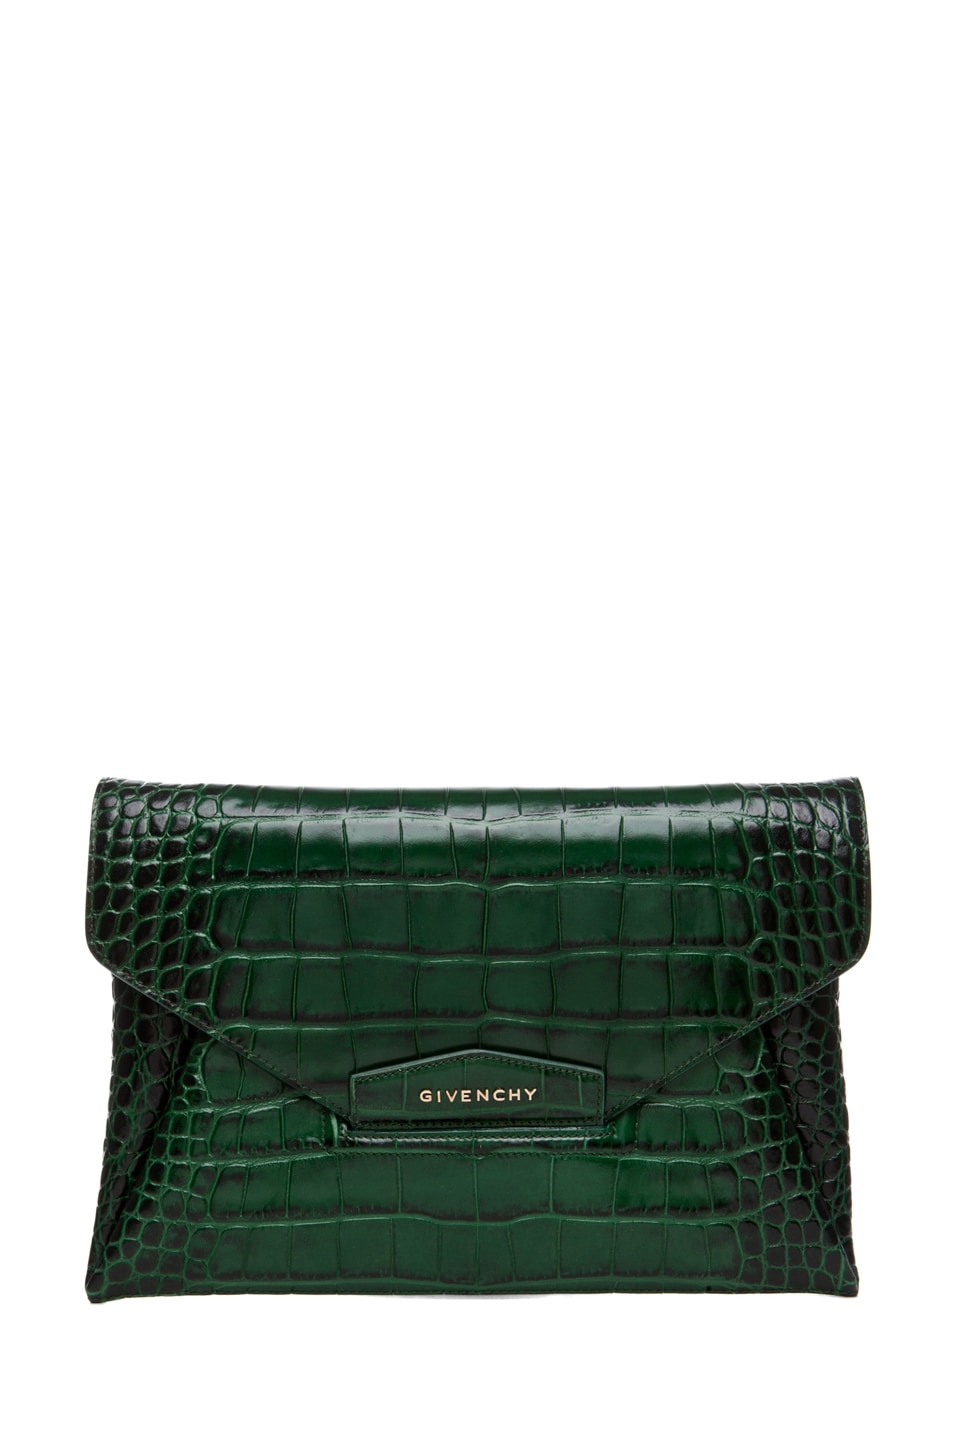 Image 1 of Givenchy Anitgona Croc Envelope Clutch in Emerald Green